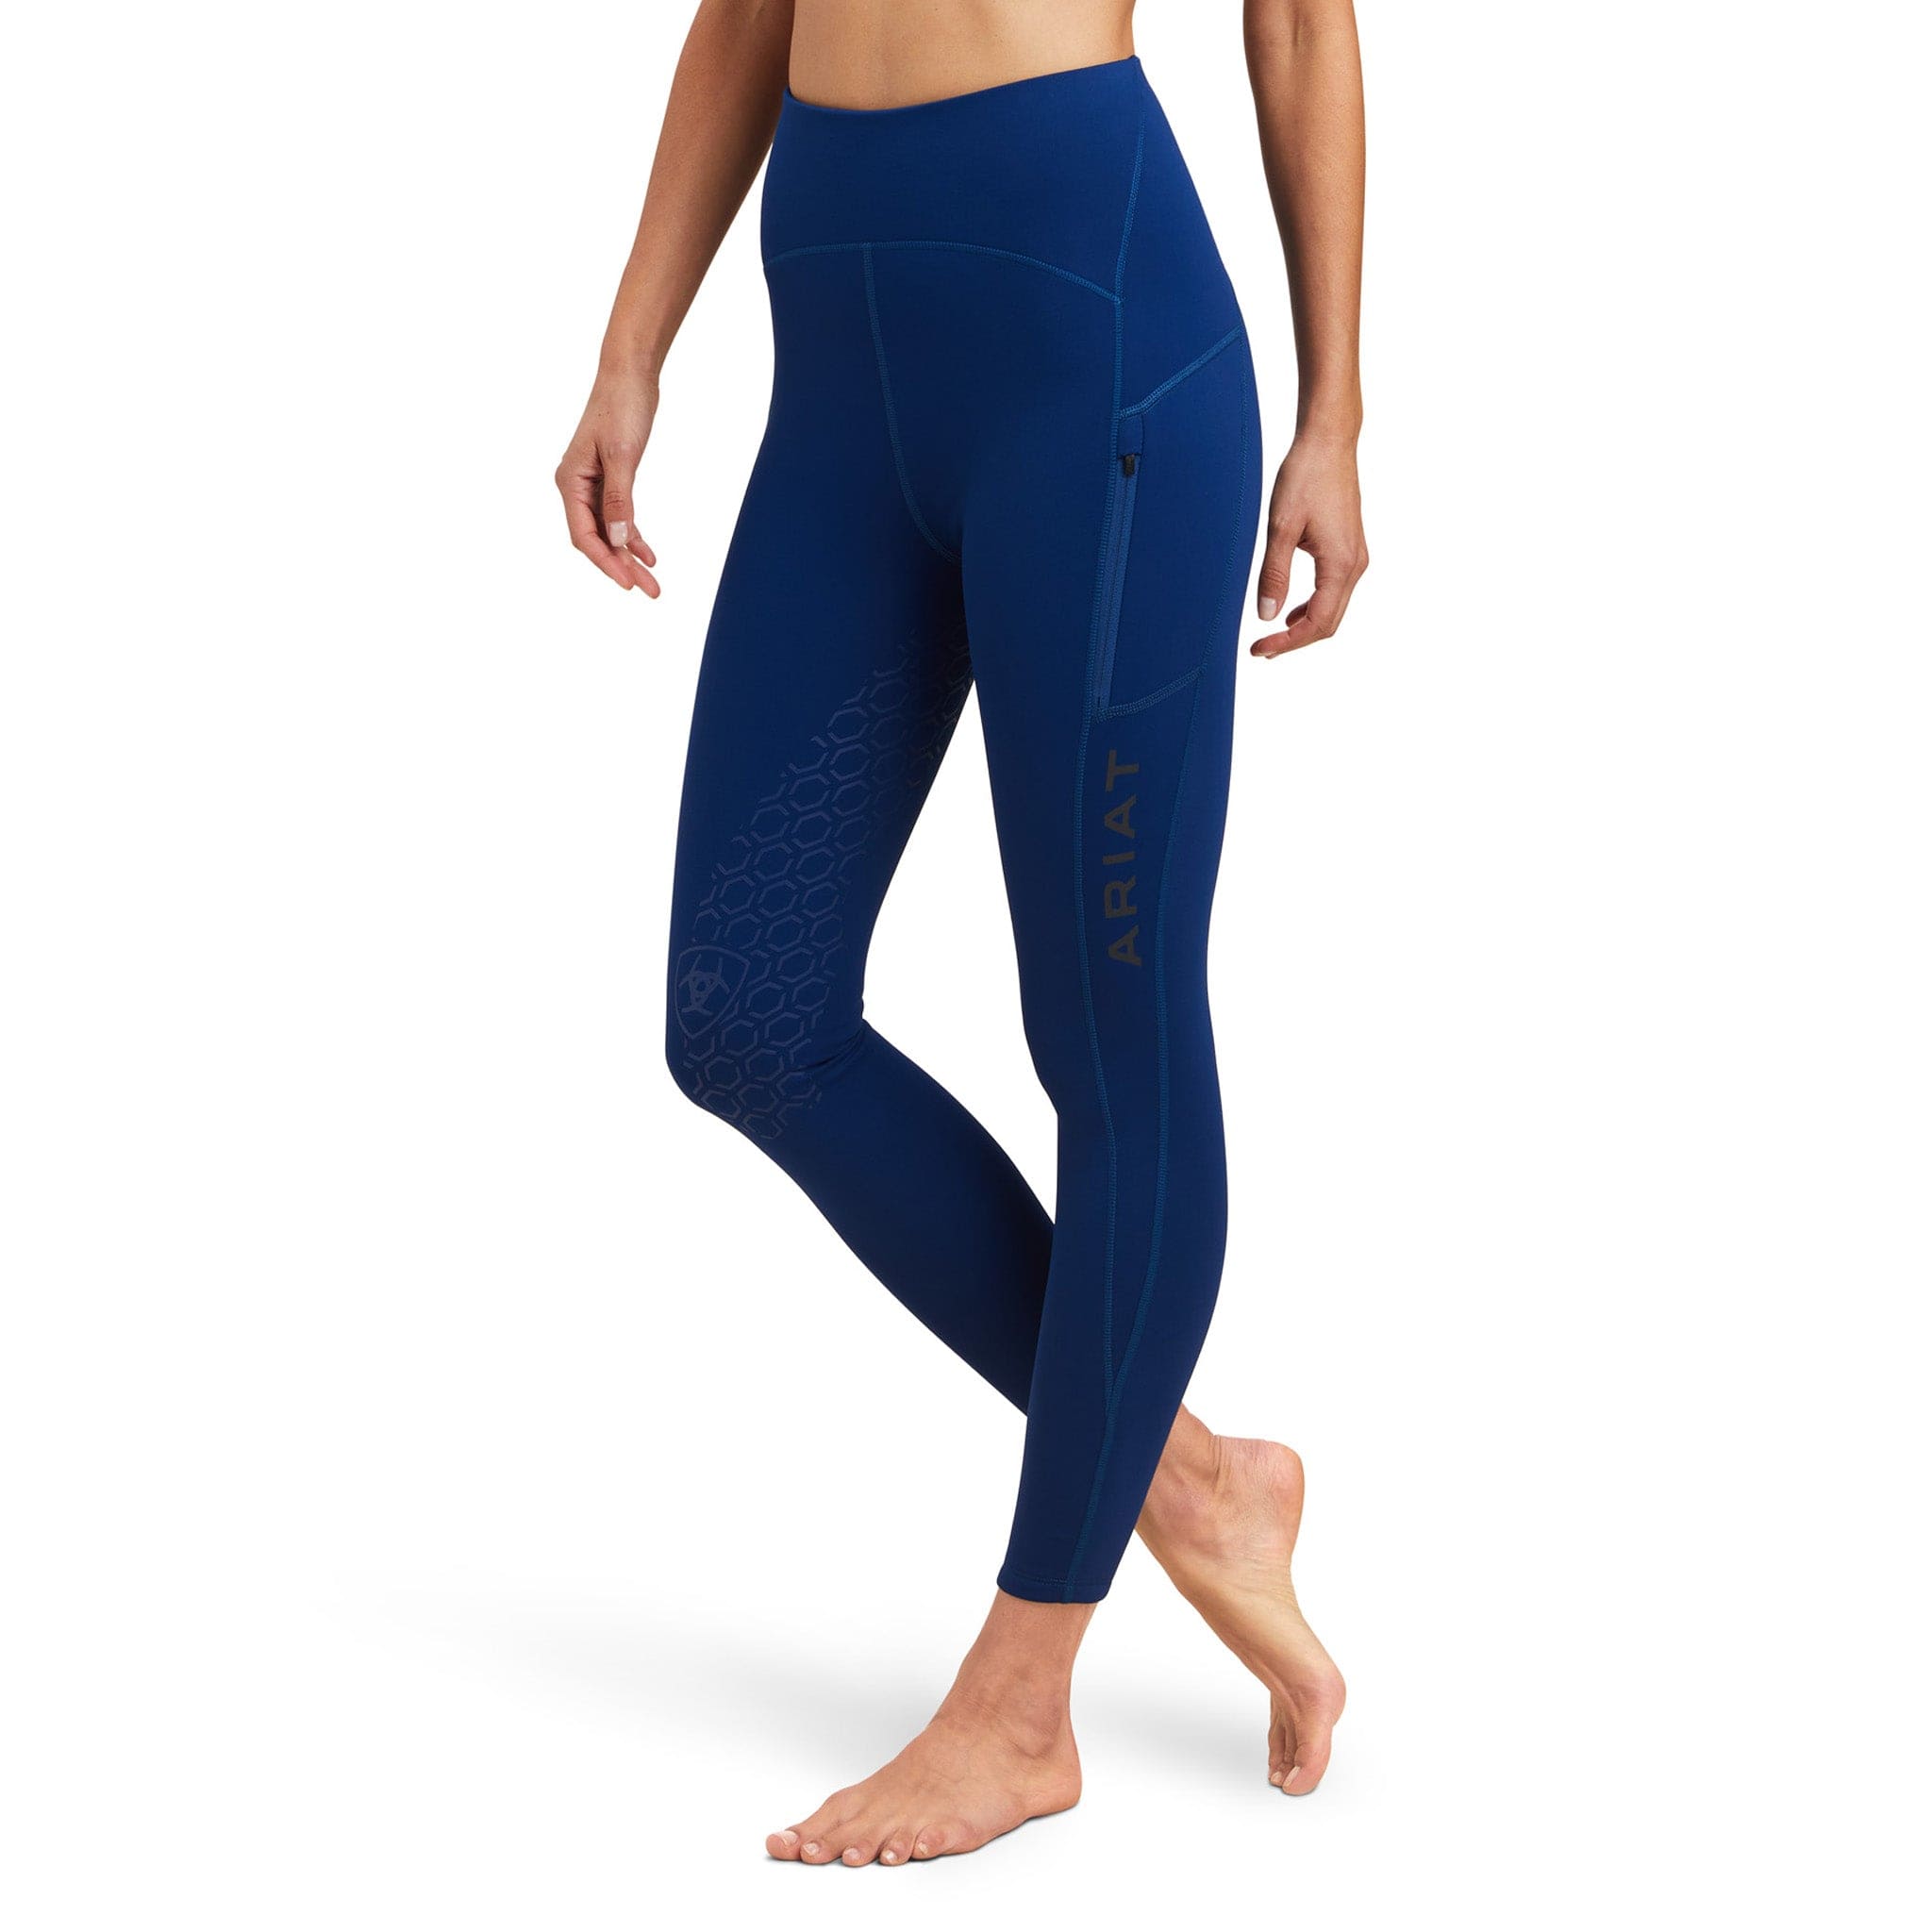 Image of Ariat Venture Thermal Silicone Knee Patch Riding Tights Blue